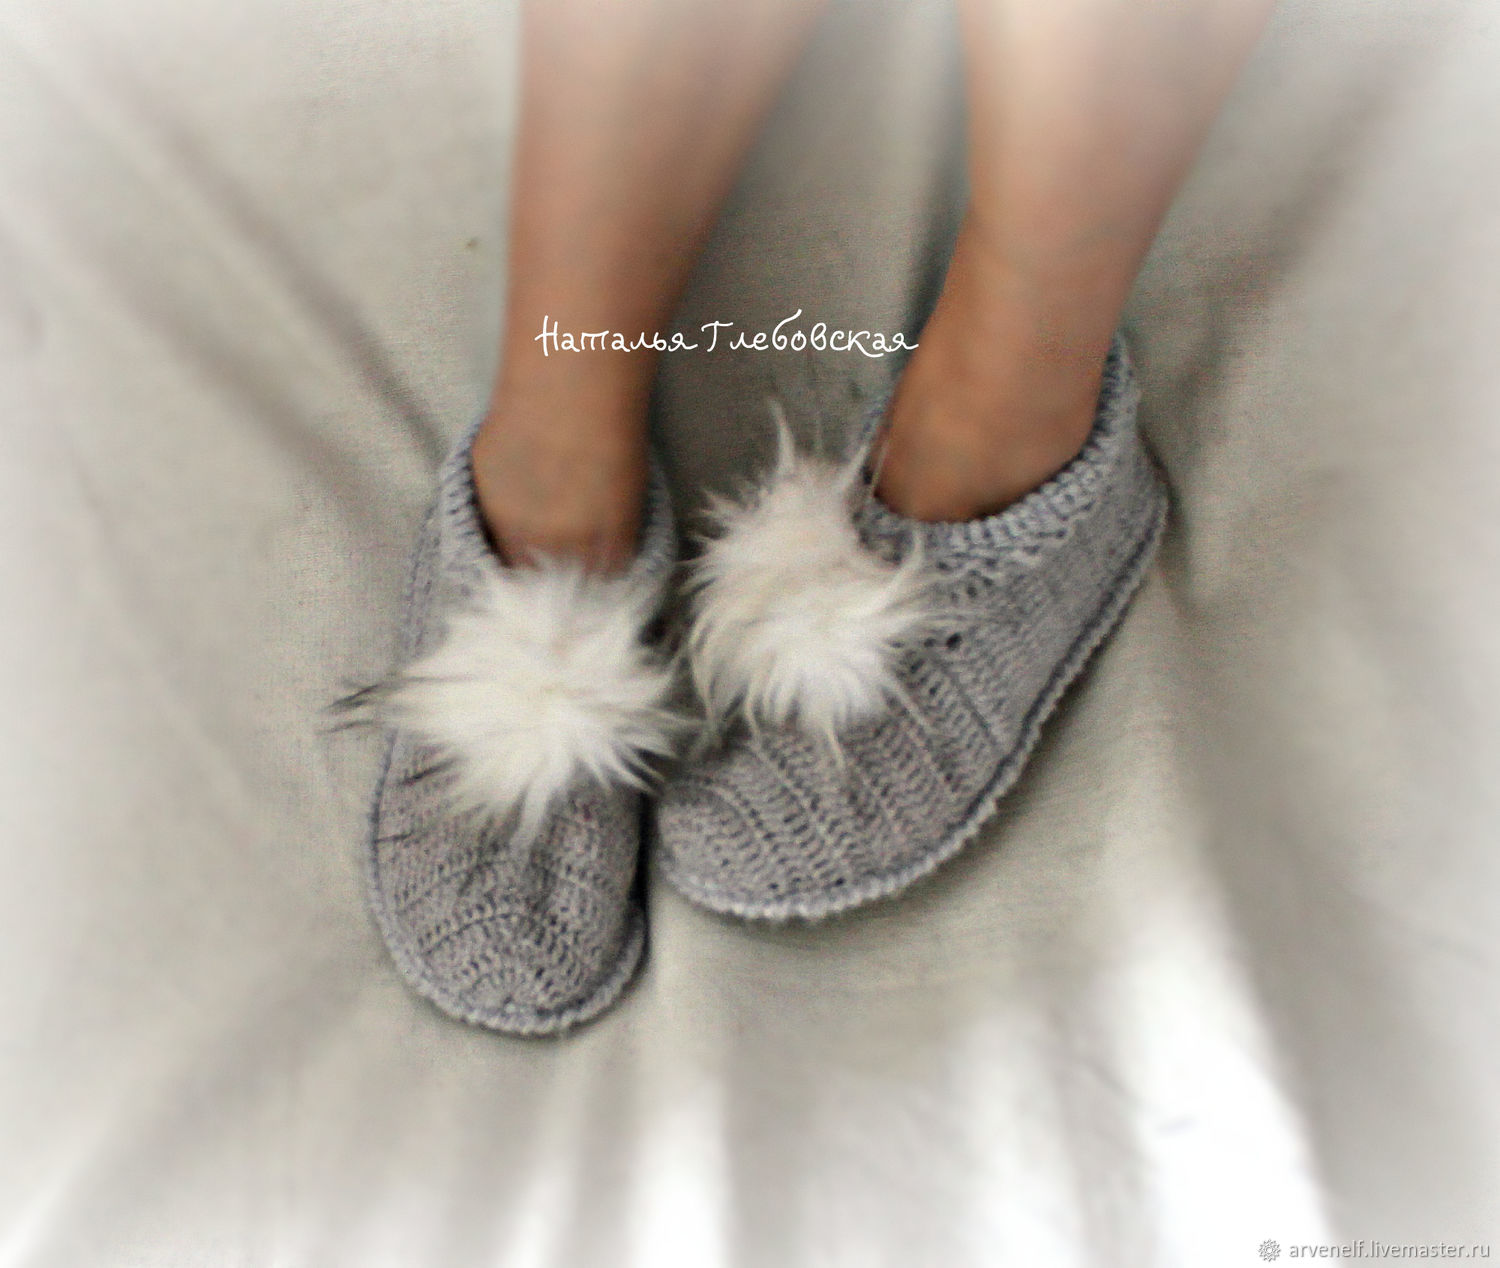 slippers with pom poms